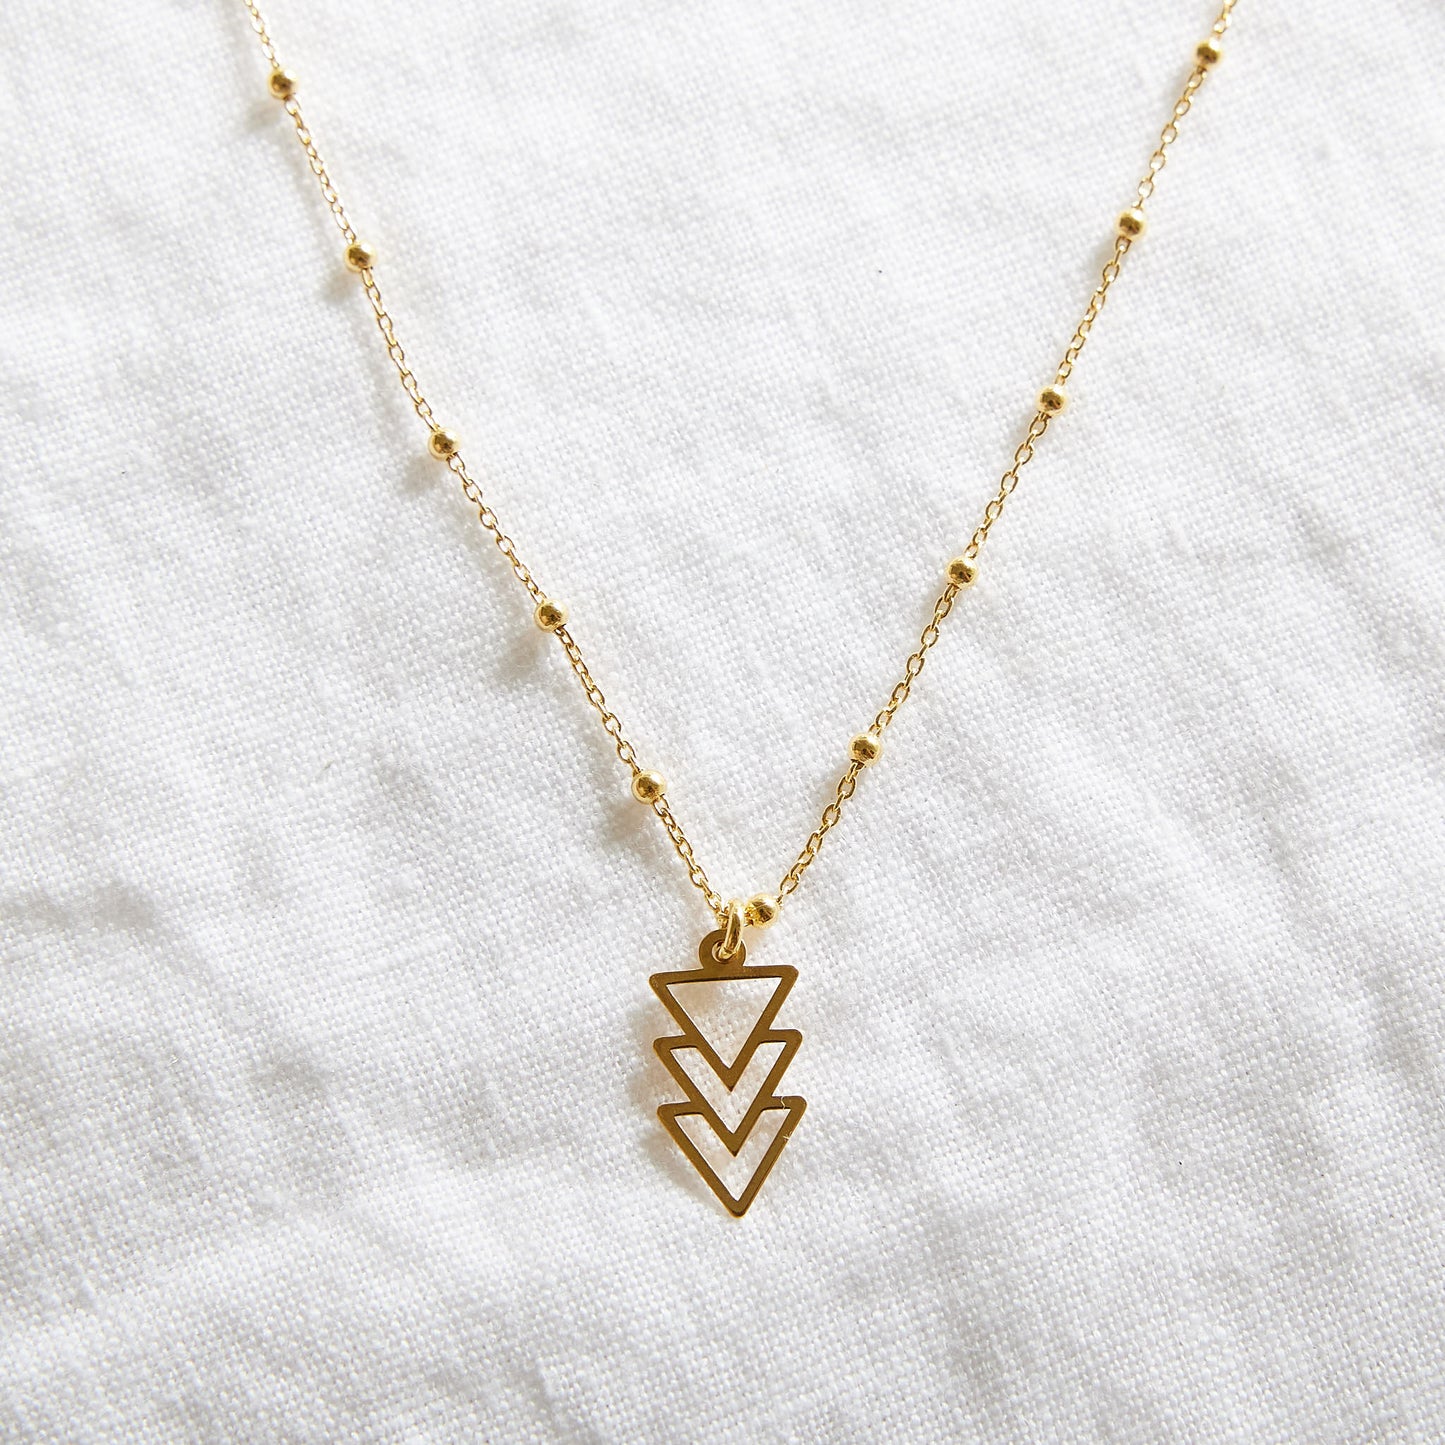 Triangles on 24k Gold plated ball chain